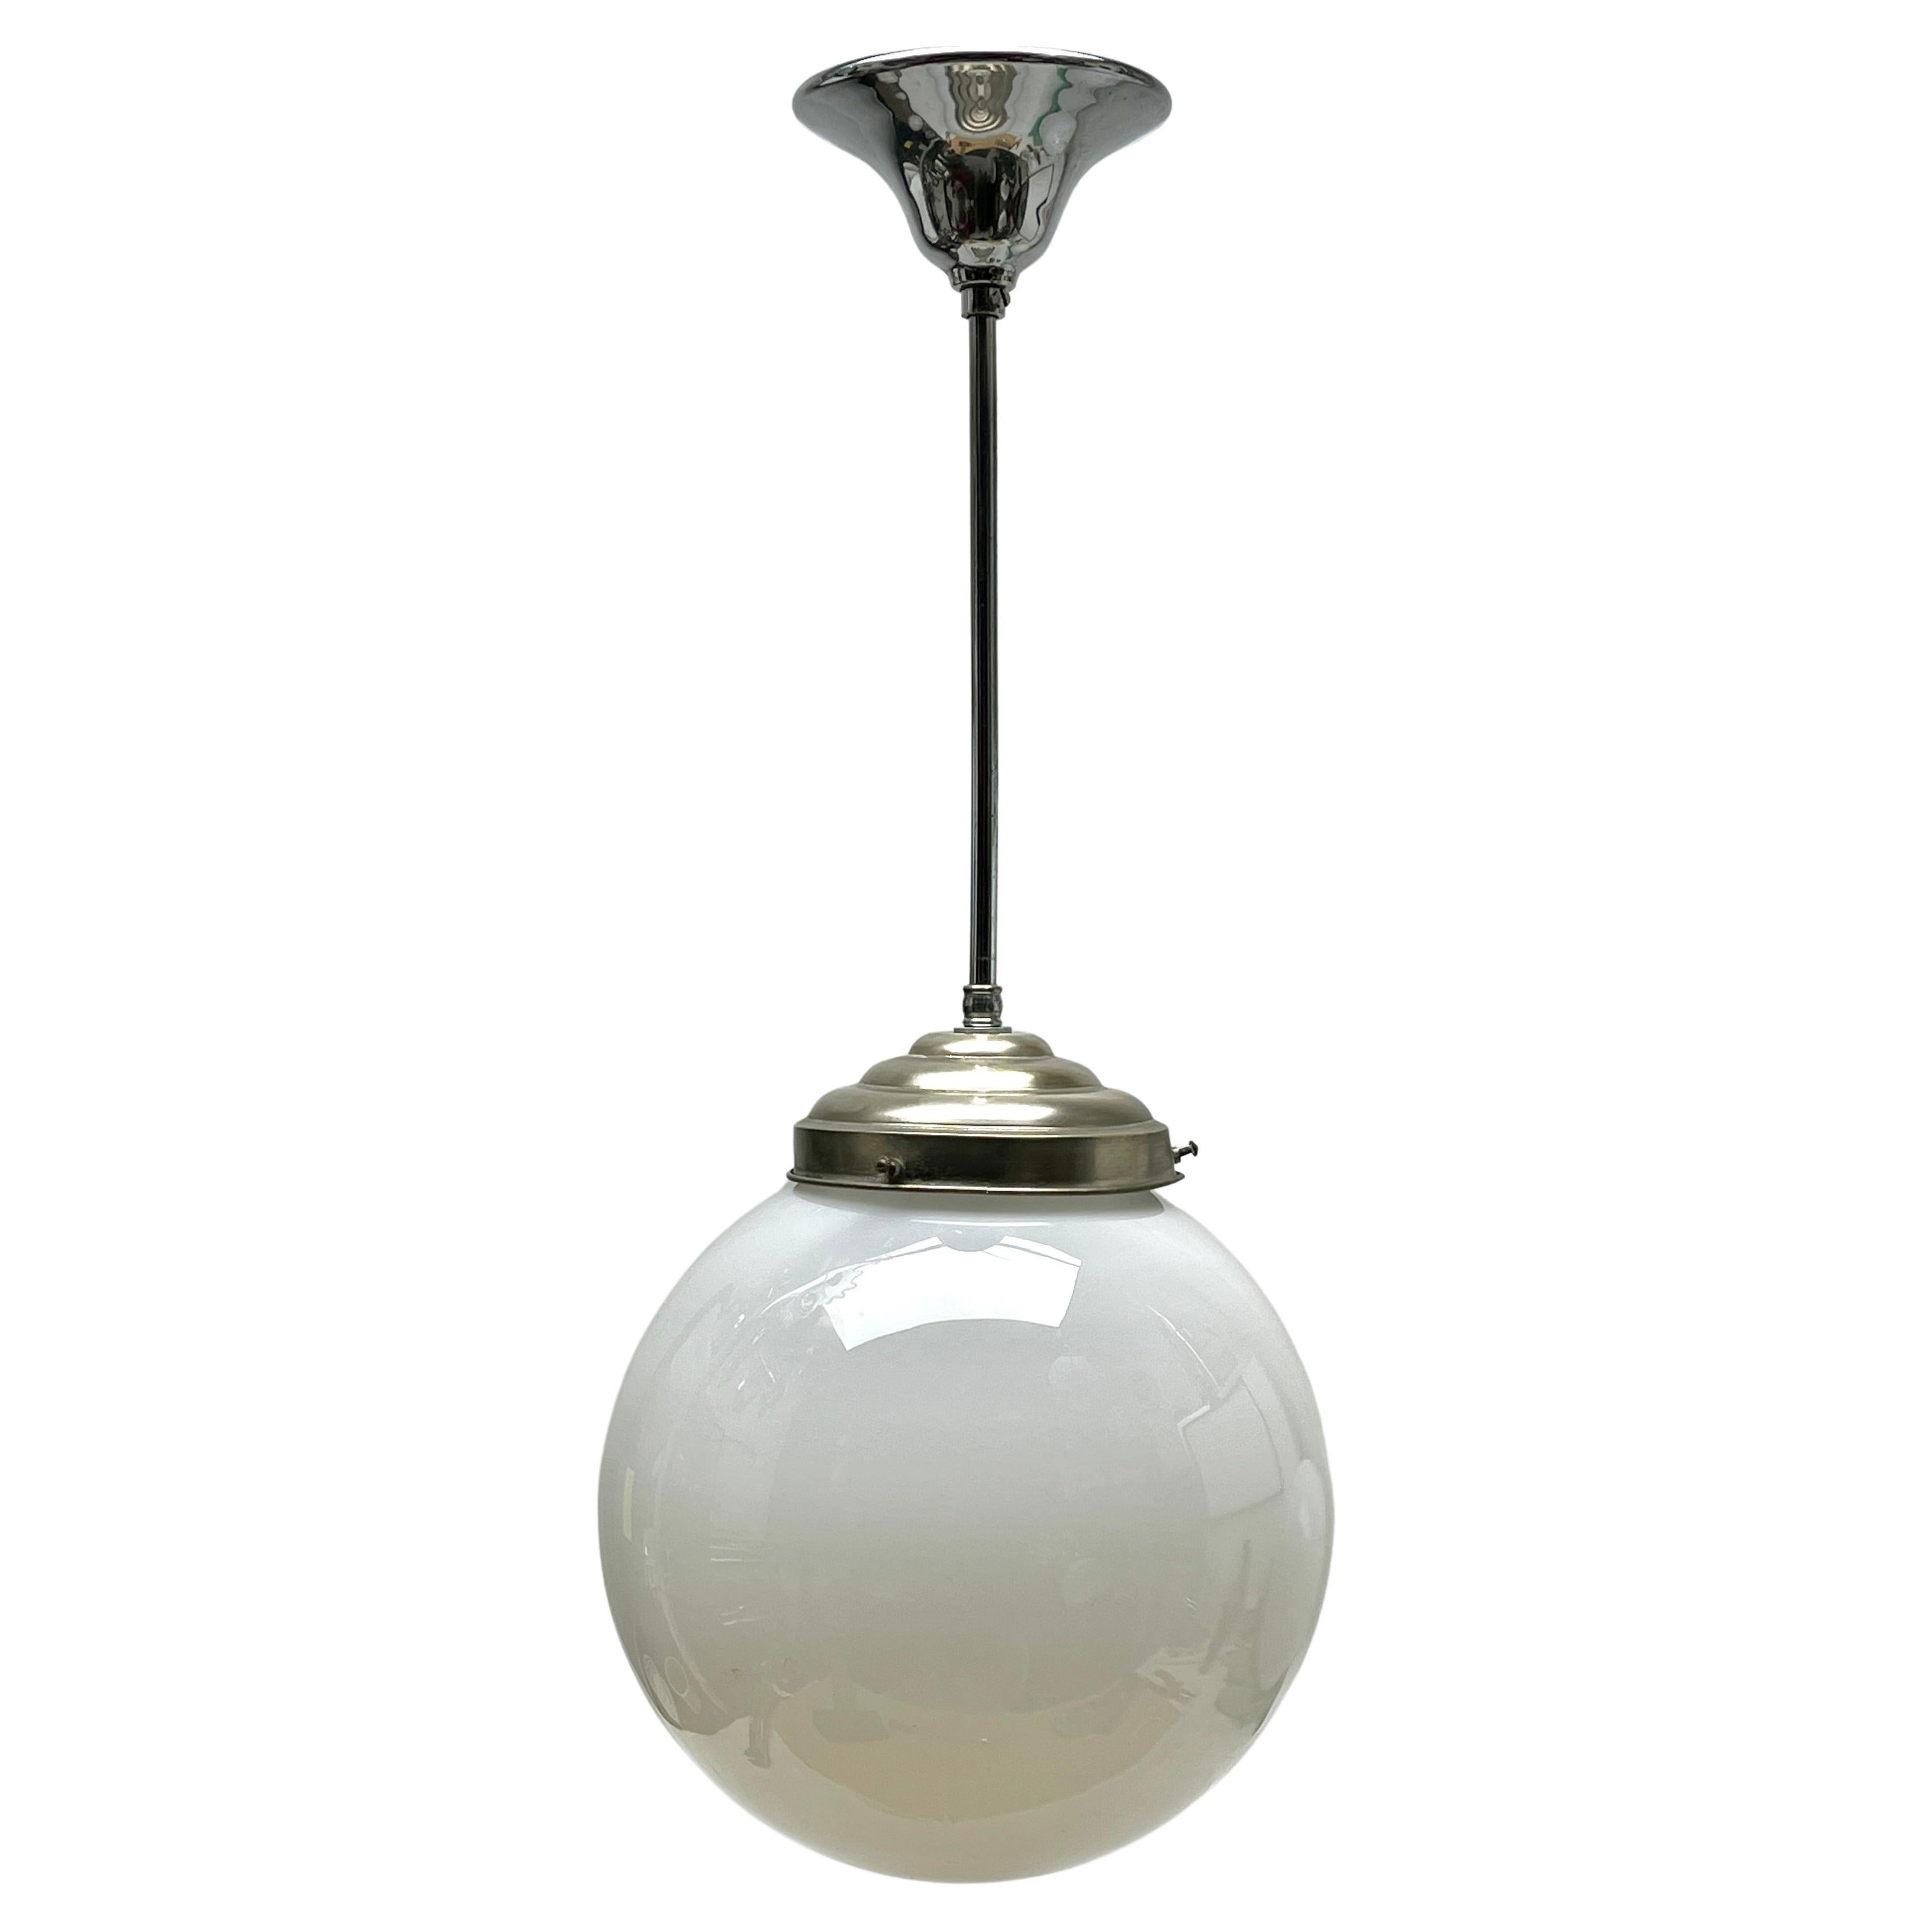 Phillips Pendant Stem Lamp with a Globular Opaline Shade, 1930s, Netherlands For Sale